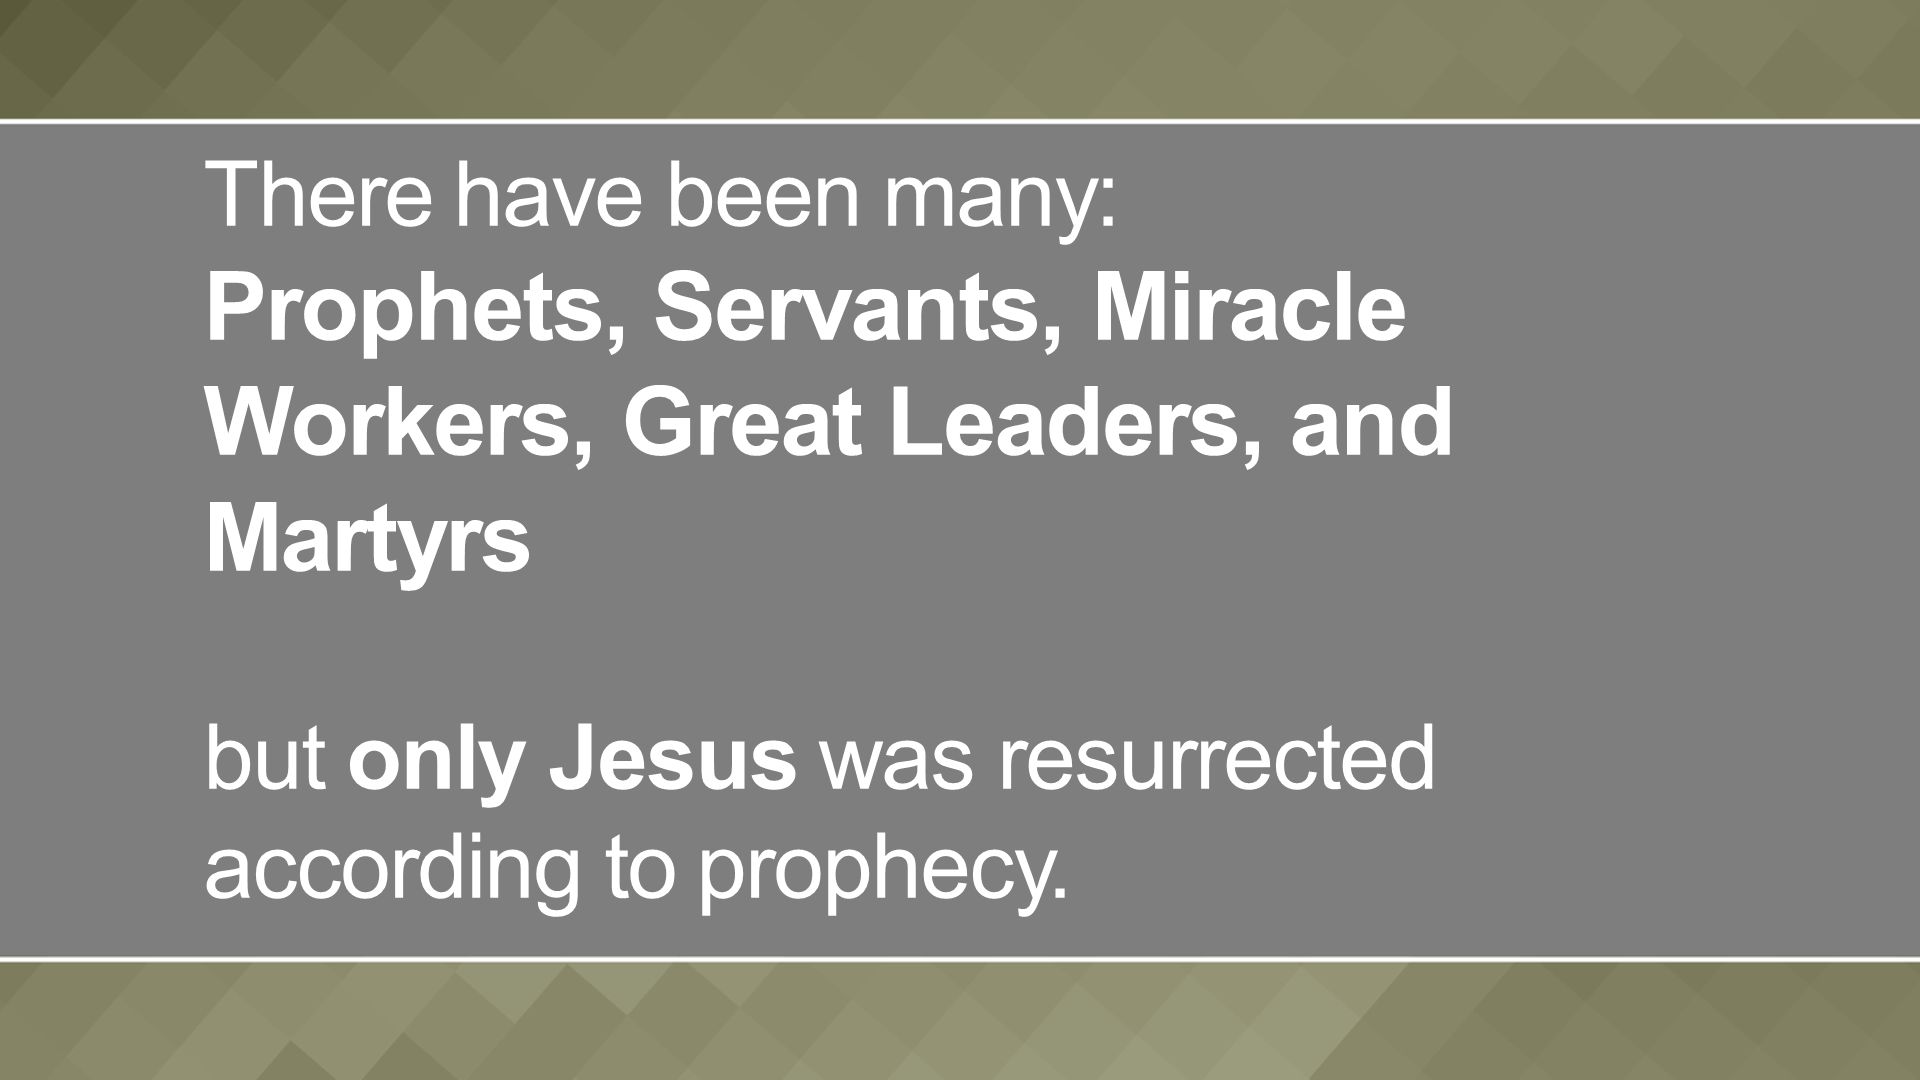 There have been many: Prophets, Servants, Miracle Workers, Great Leaders, and Martyrs but only Jesus was resurrected according to prophecy.